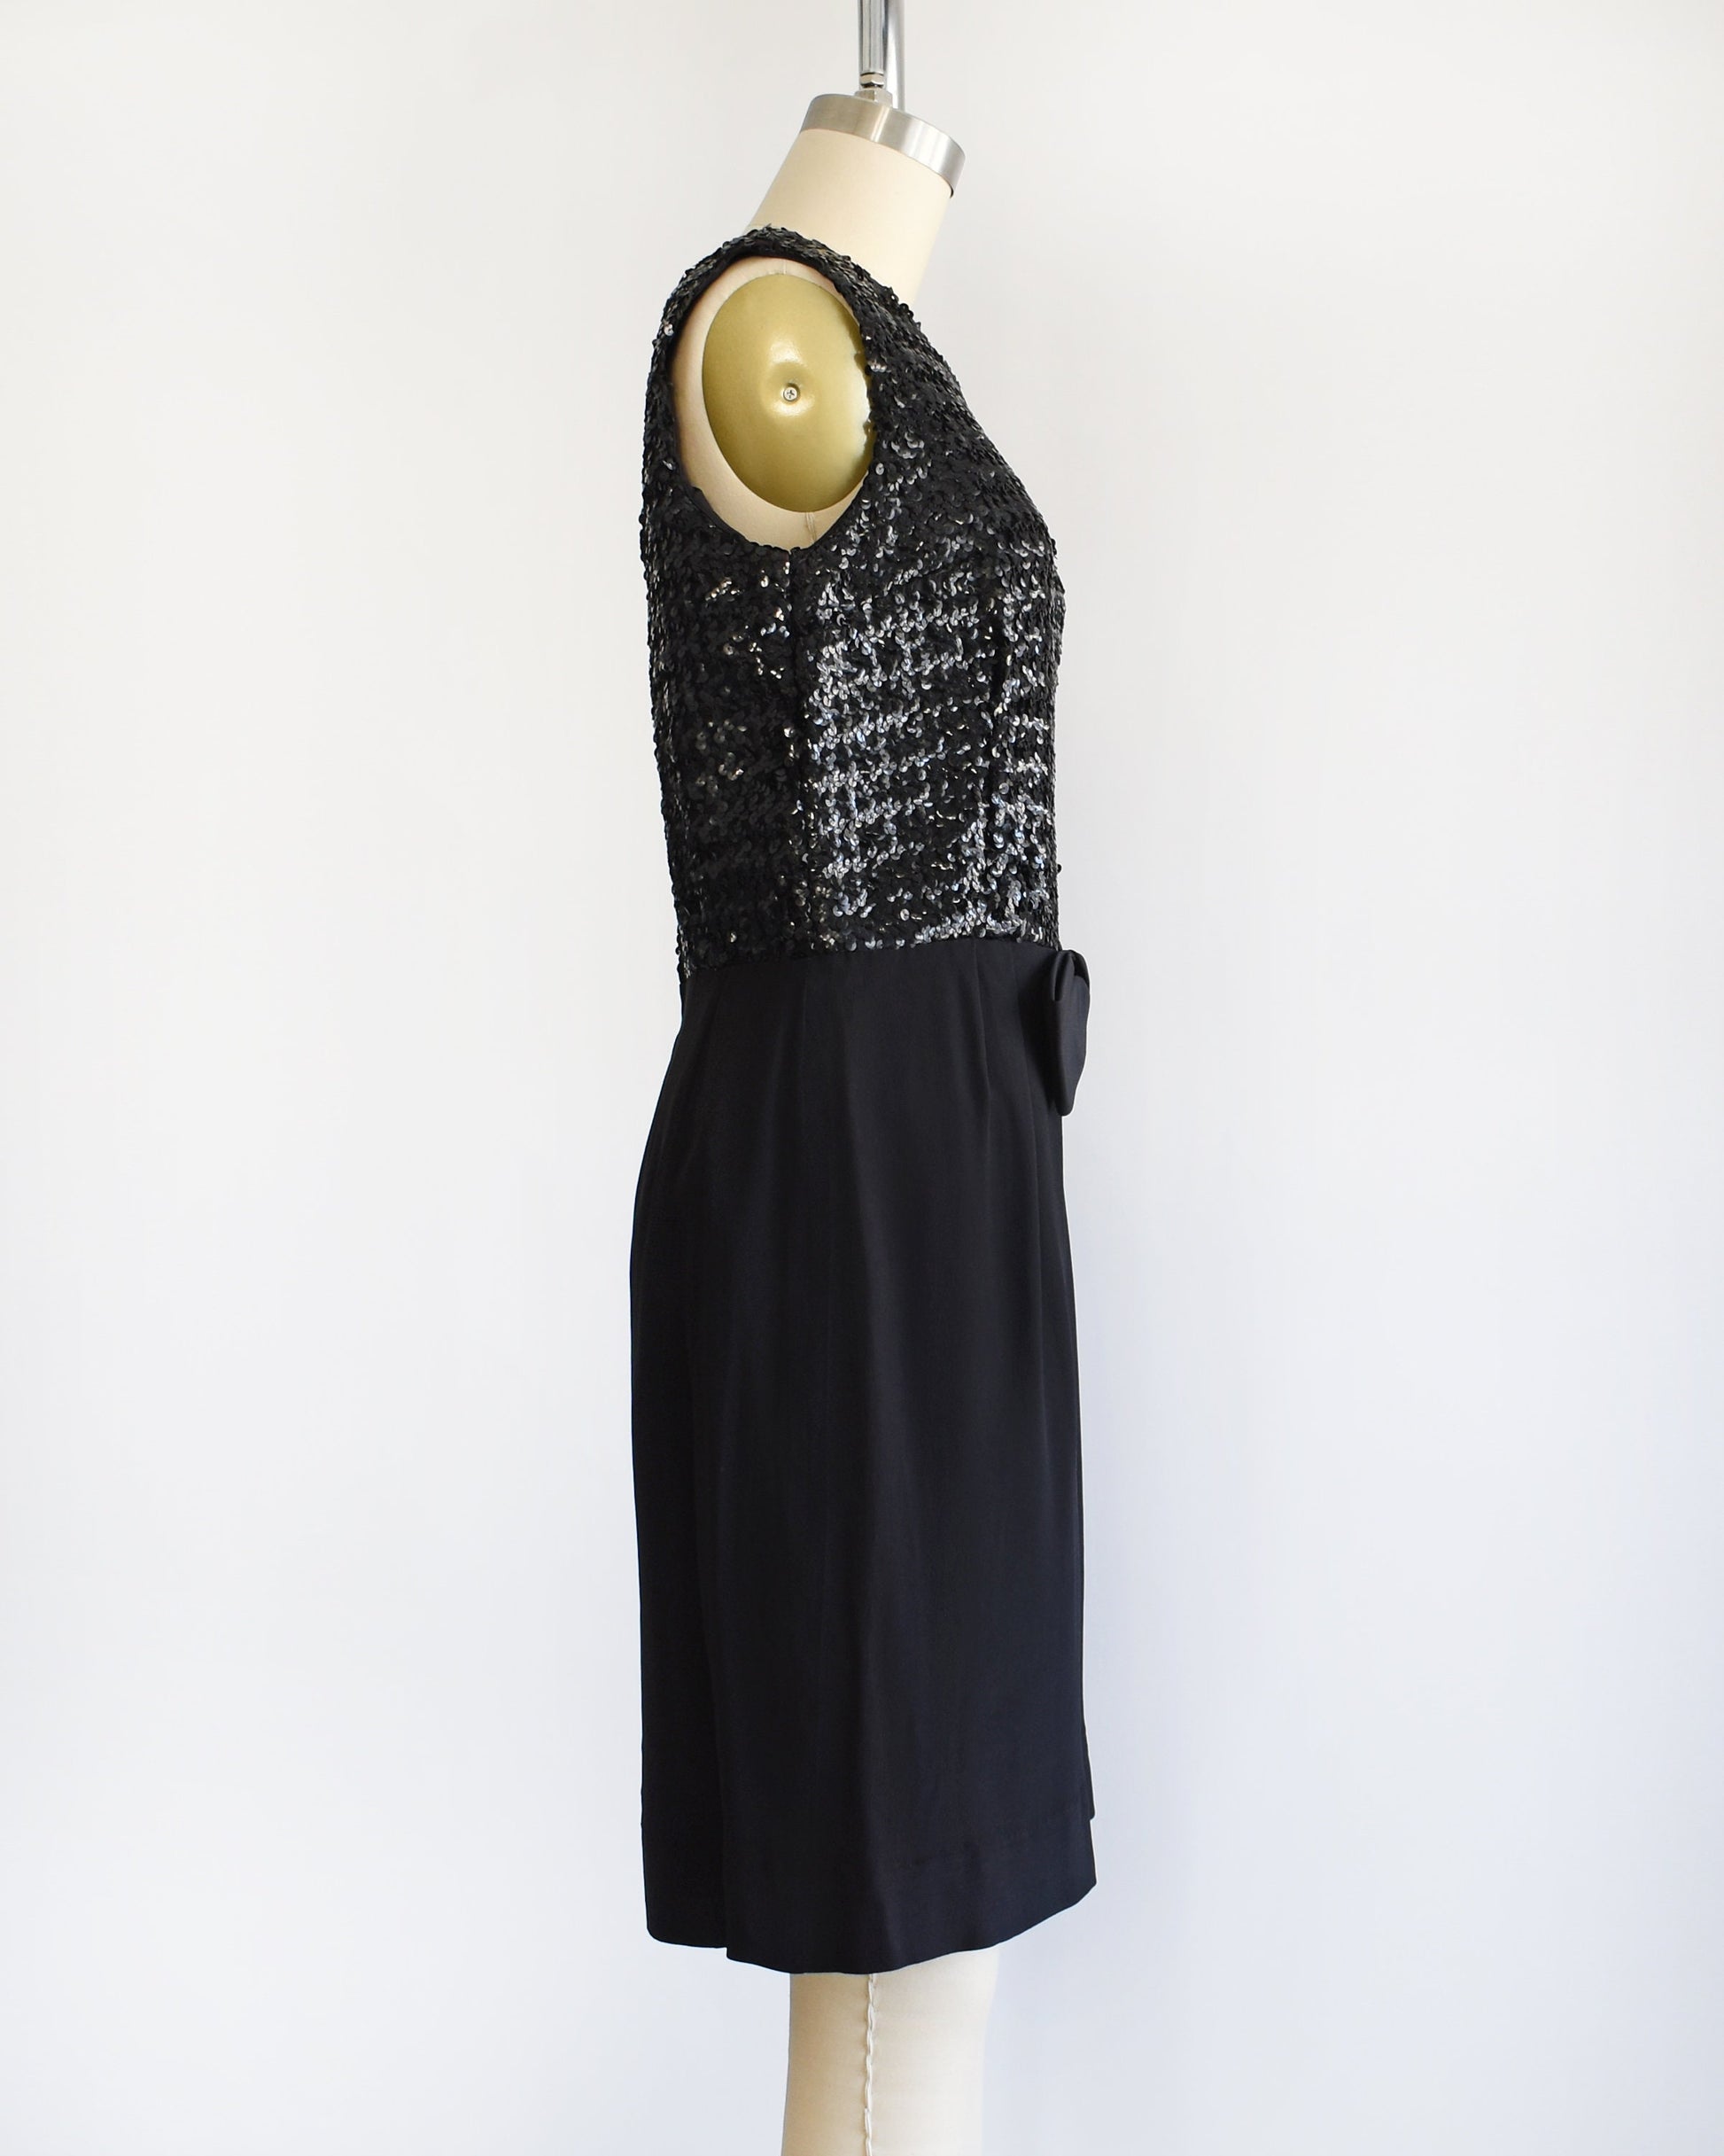 Side view of a vintage late 50s early 60s black dress that has a black sequin bodice, a bow at the waist, and a pencil skirt. The dress is modeled on a dress form